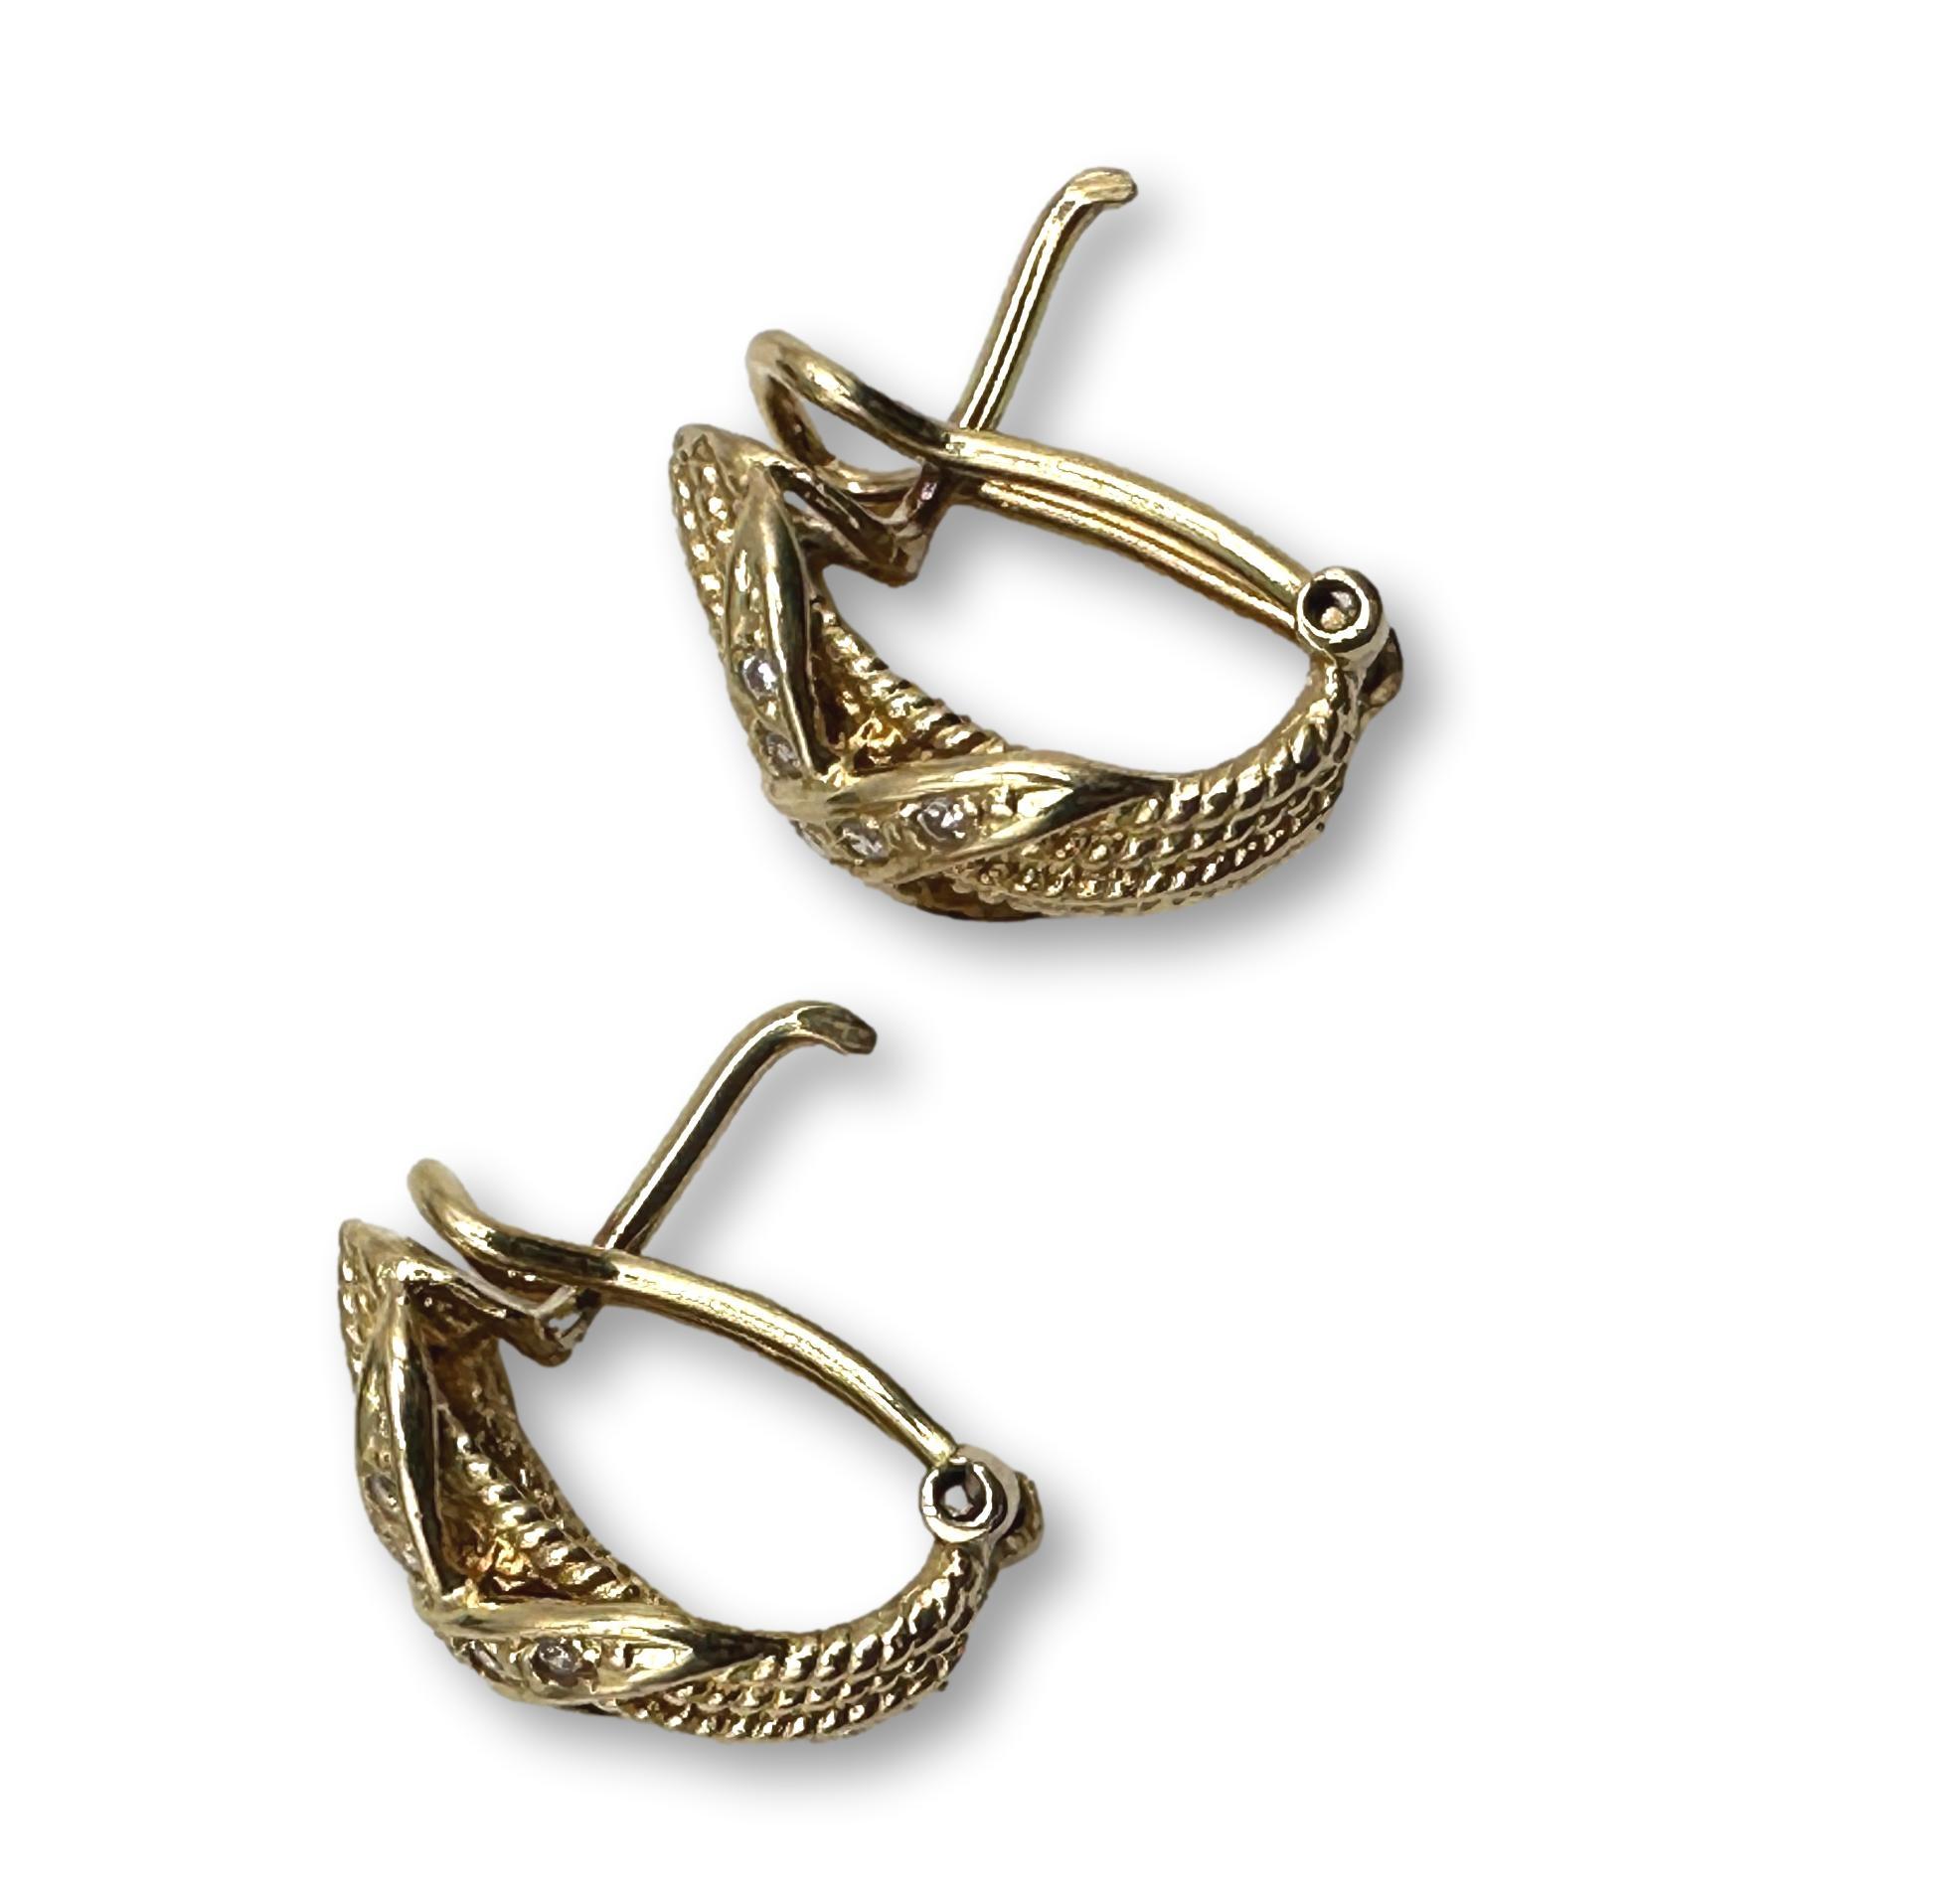 Matched Set of 14K Gold and Diamond Rope Knot Earrings and Ring